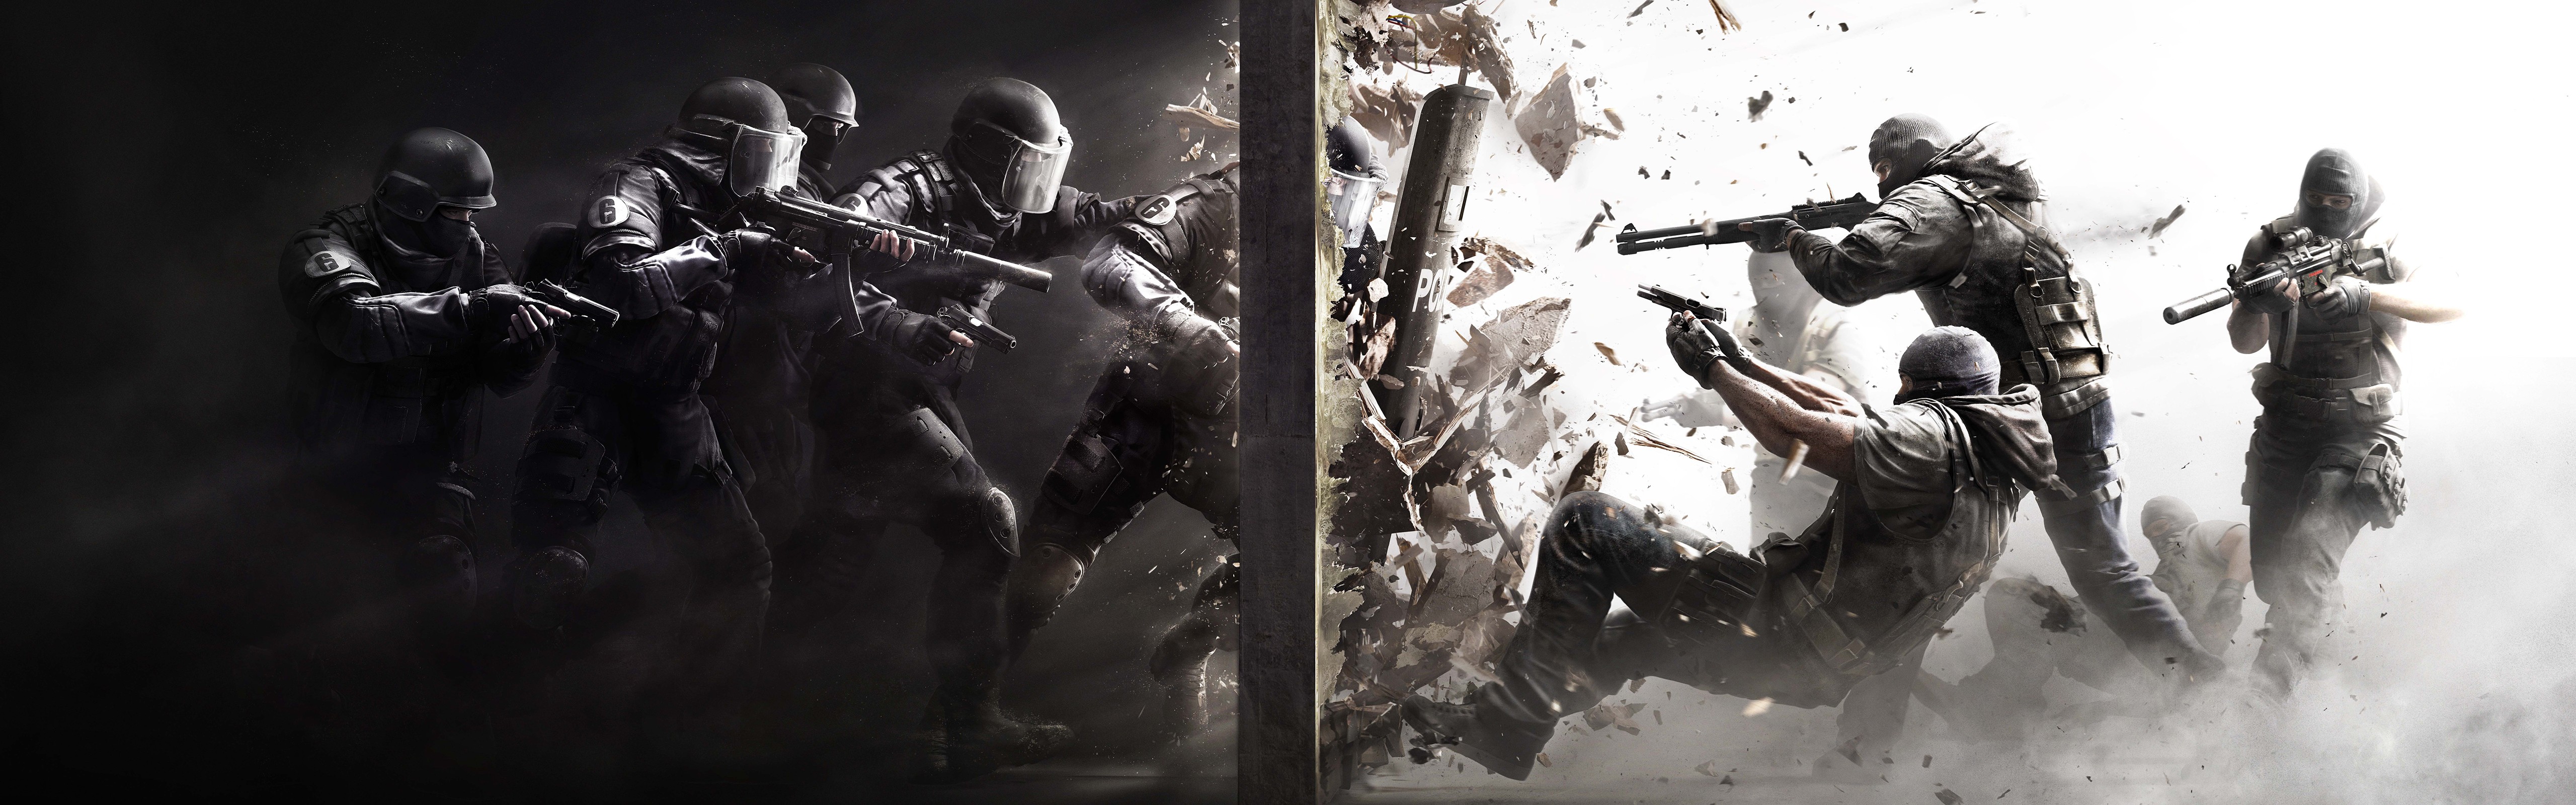 Rainbow Six, Video Games, Tactical, Special Forces, Dual Monitors, Multiple Display Wallpaper